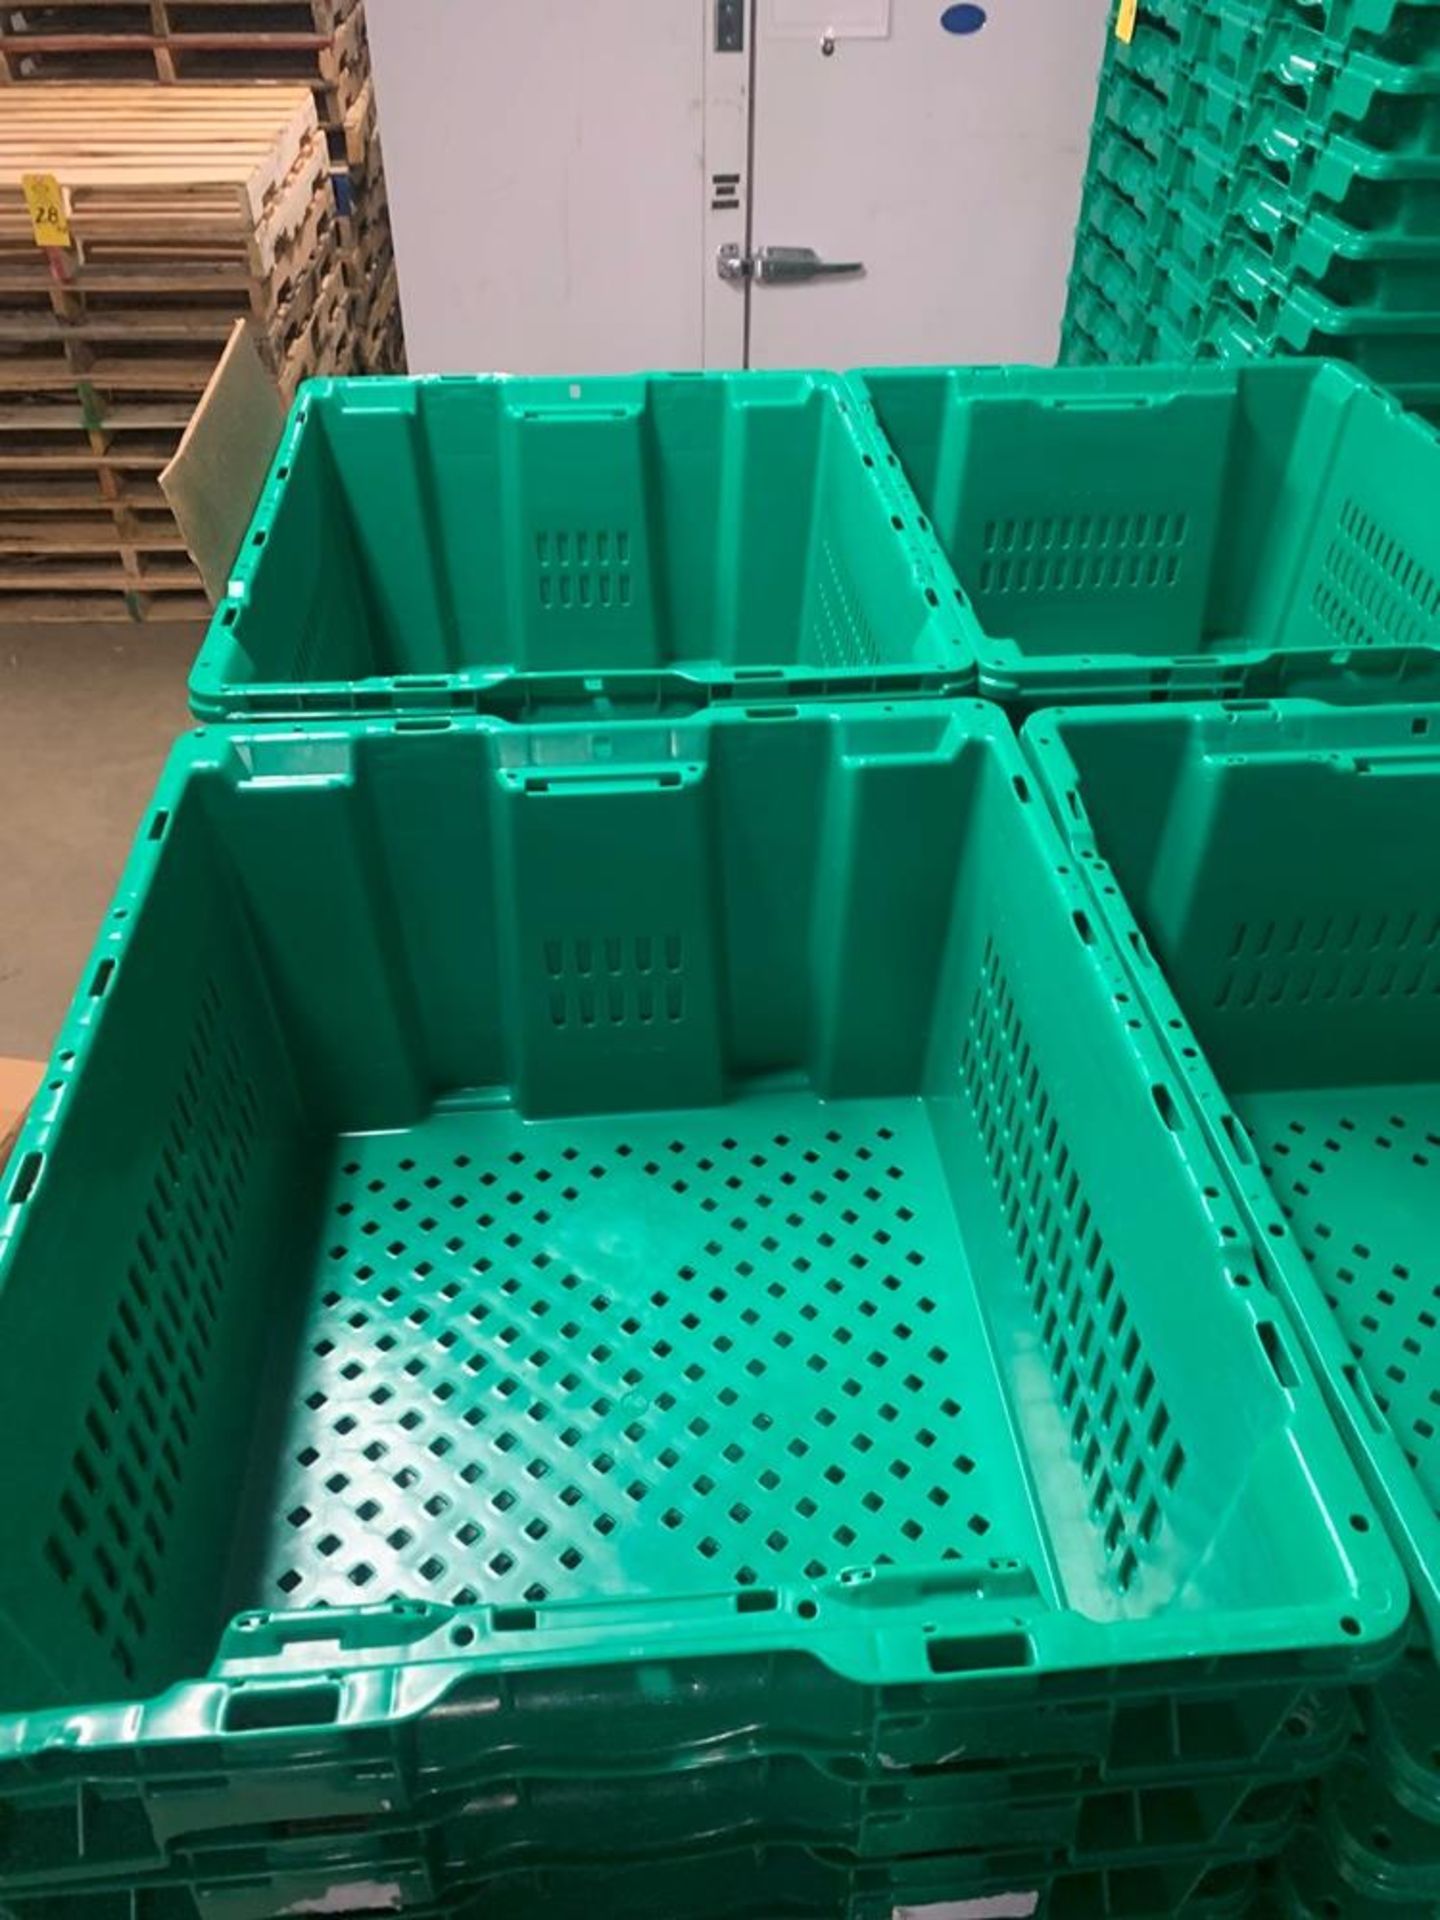 Orbis Mdl. GS6050-27 Plastic Totes, 18" X 22" X 12" (Required Loading Fee: $25.00) NO HAND CARRY ( - Image 2 of 2